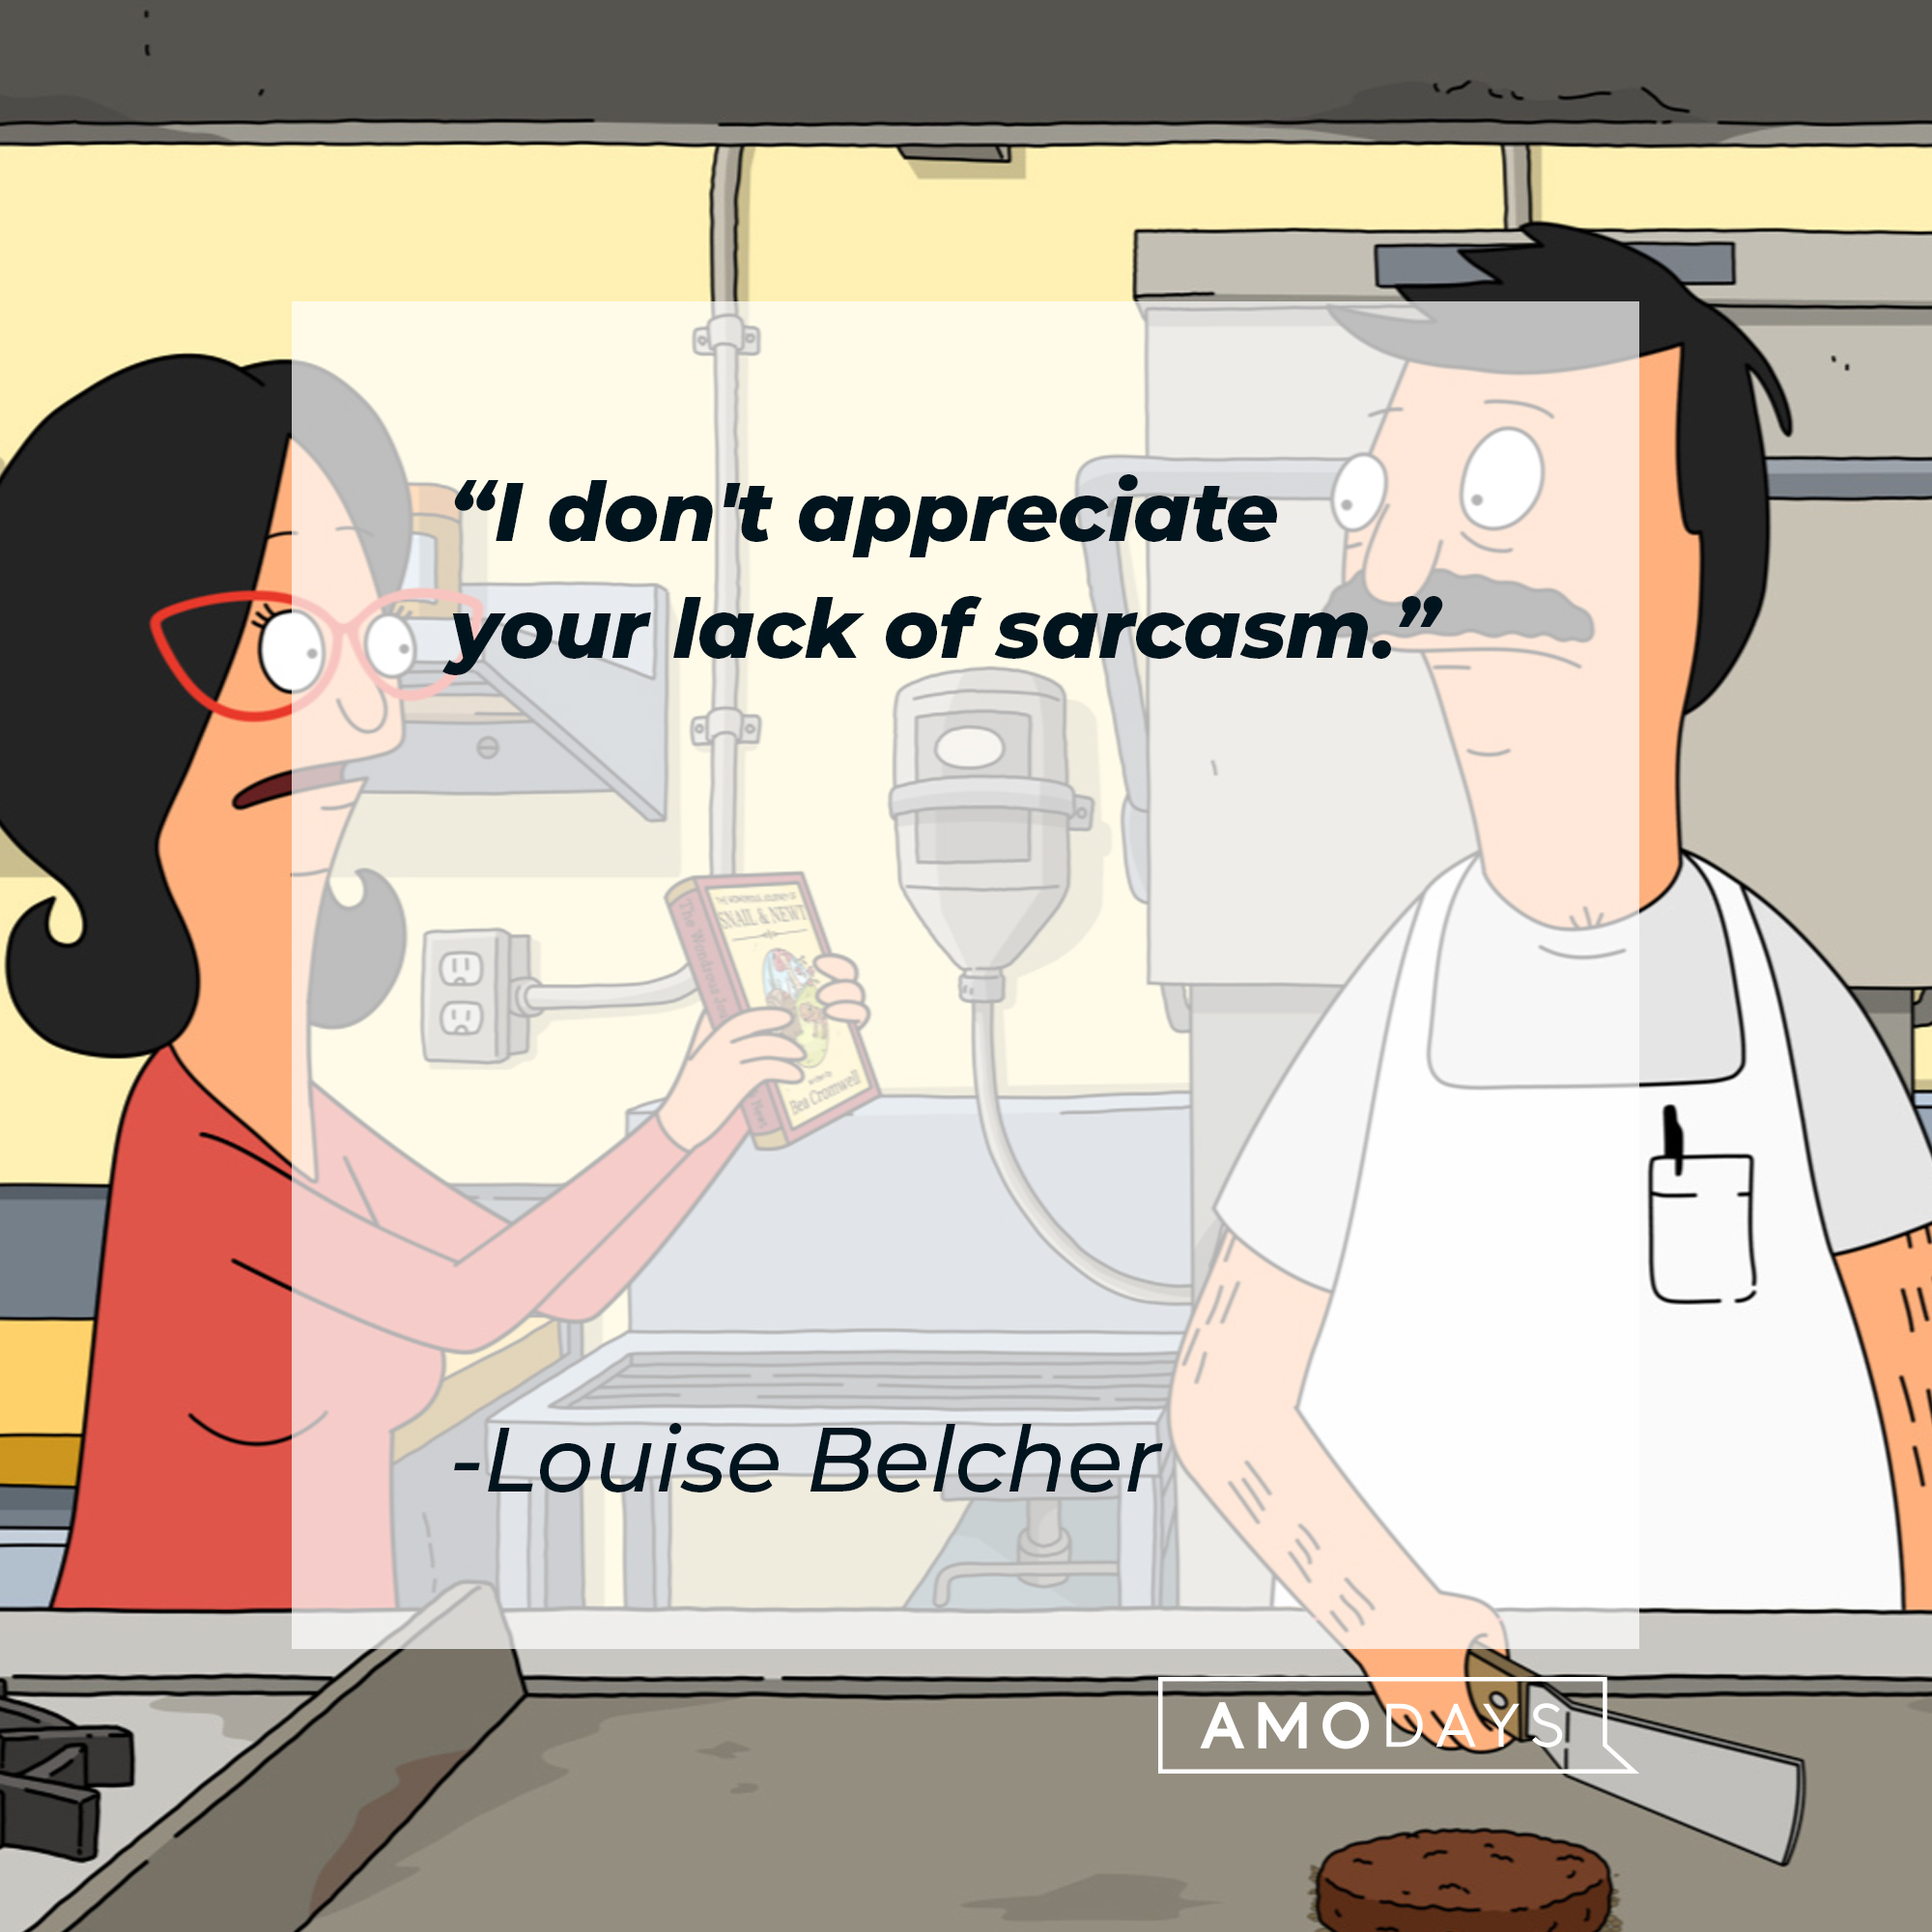 Louise Belcher's quote: "I don't appreciate your lack of sarcasm." | Source: facebook.com/BobsBurgers